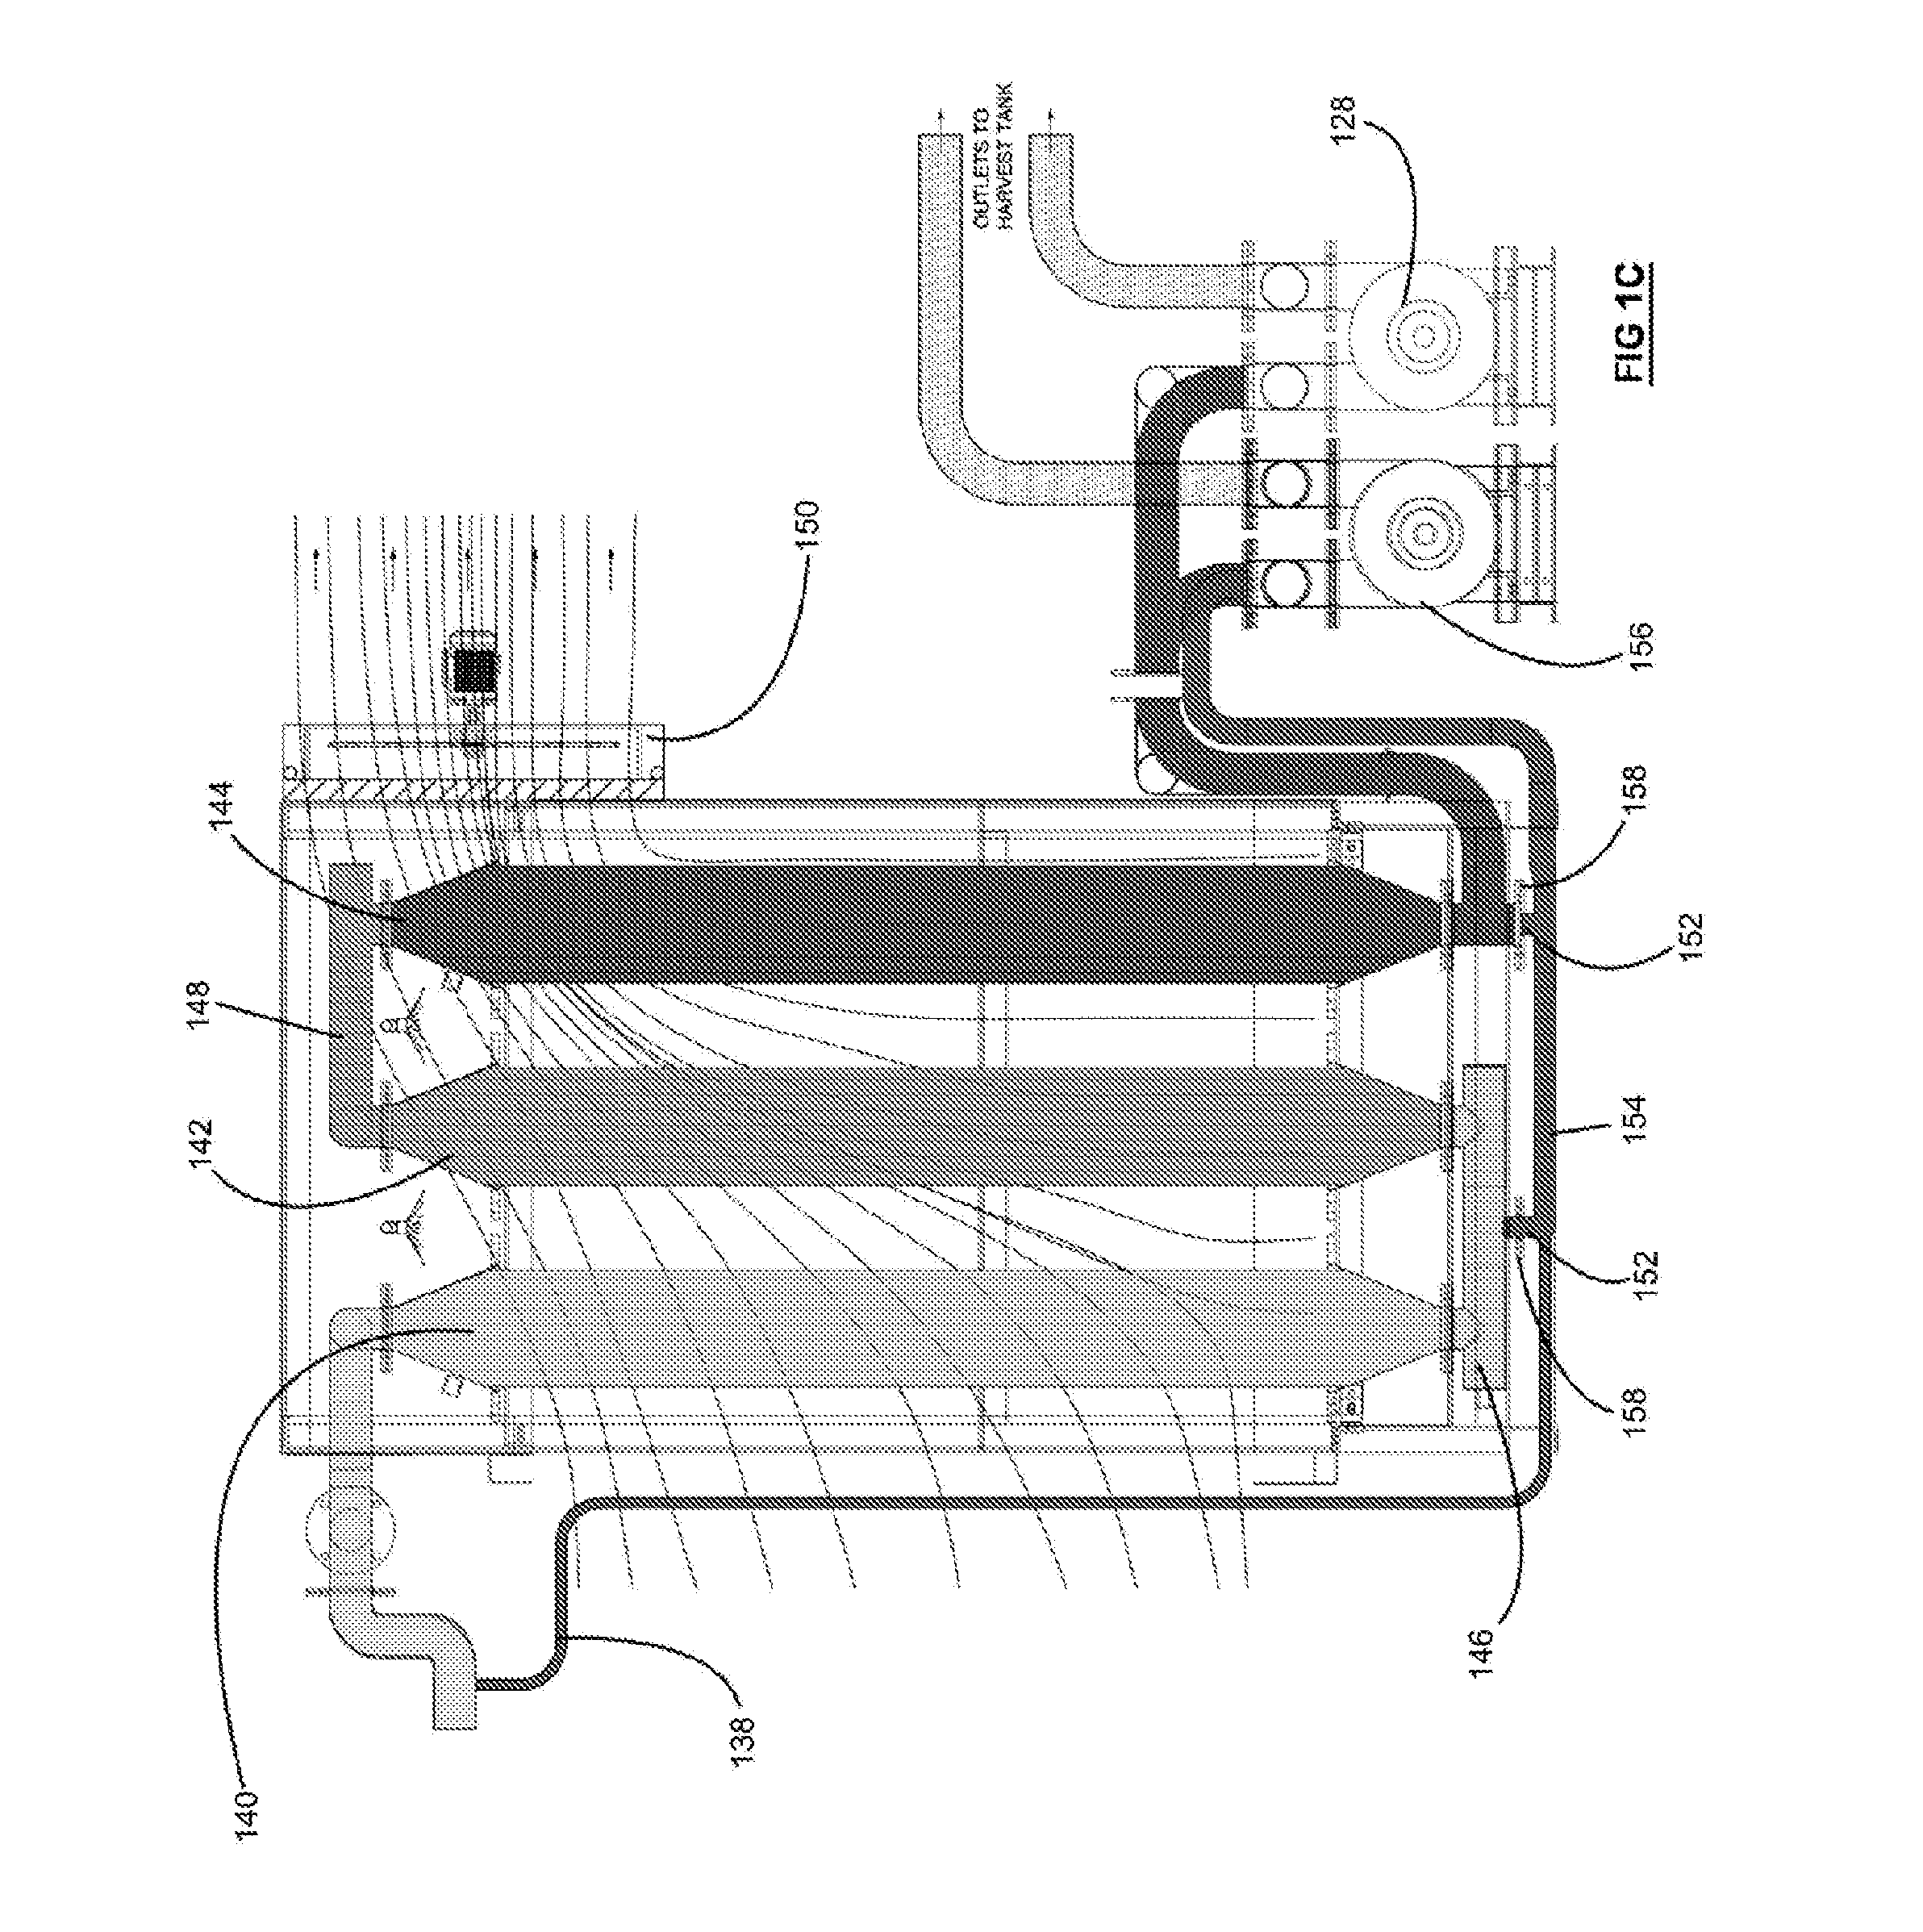 Process and apparatus for treating sludge